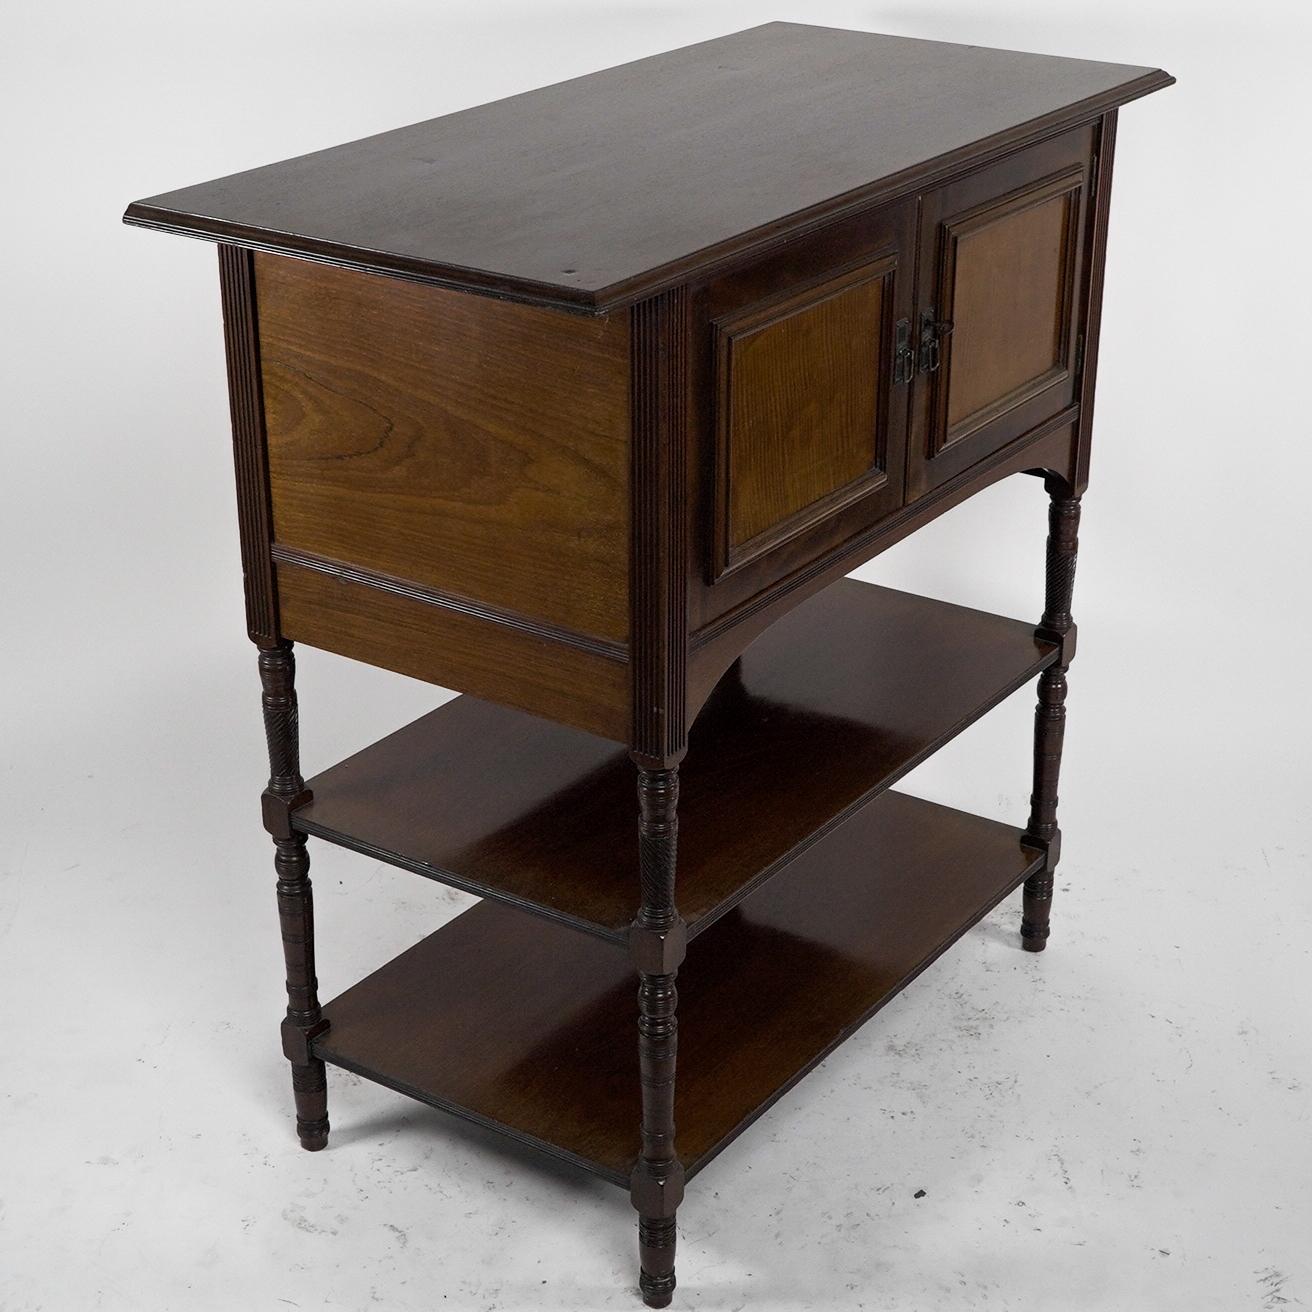 Collinson and Lock EW Godwin attributed. An Aesthetic Movement Mahogany side cabinet, the upper cupboard doors with contrasting fruit wood panels and little Japanese style brass handles. Two flat open shelves to the lower section united by finely